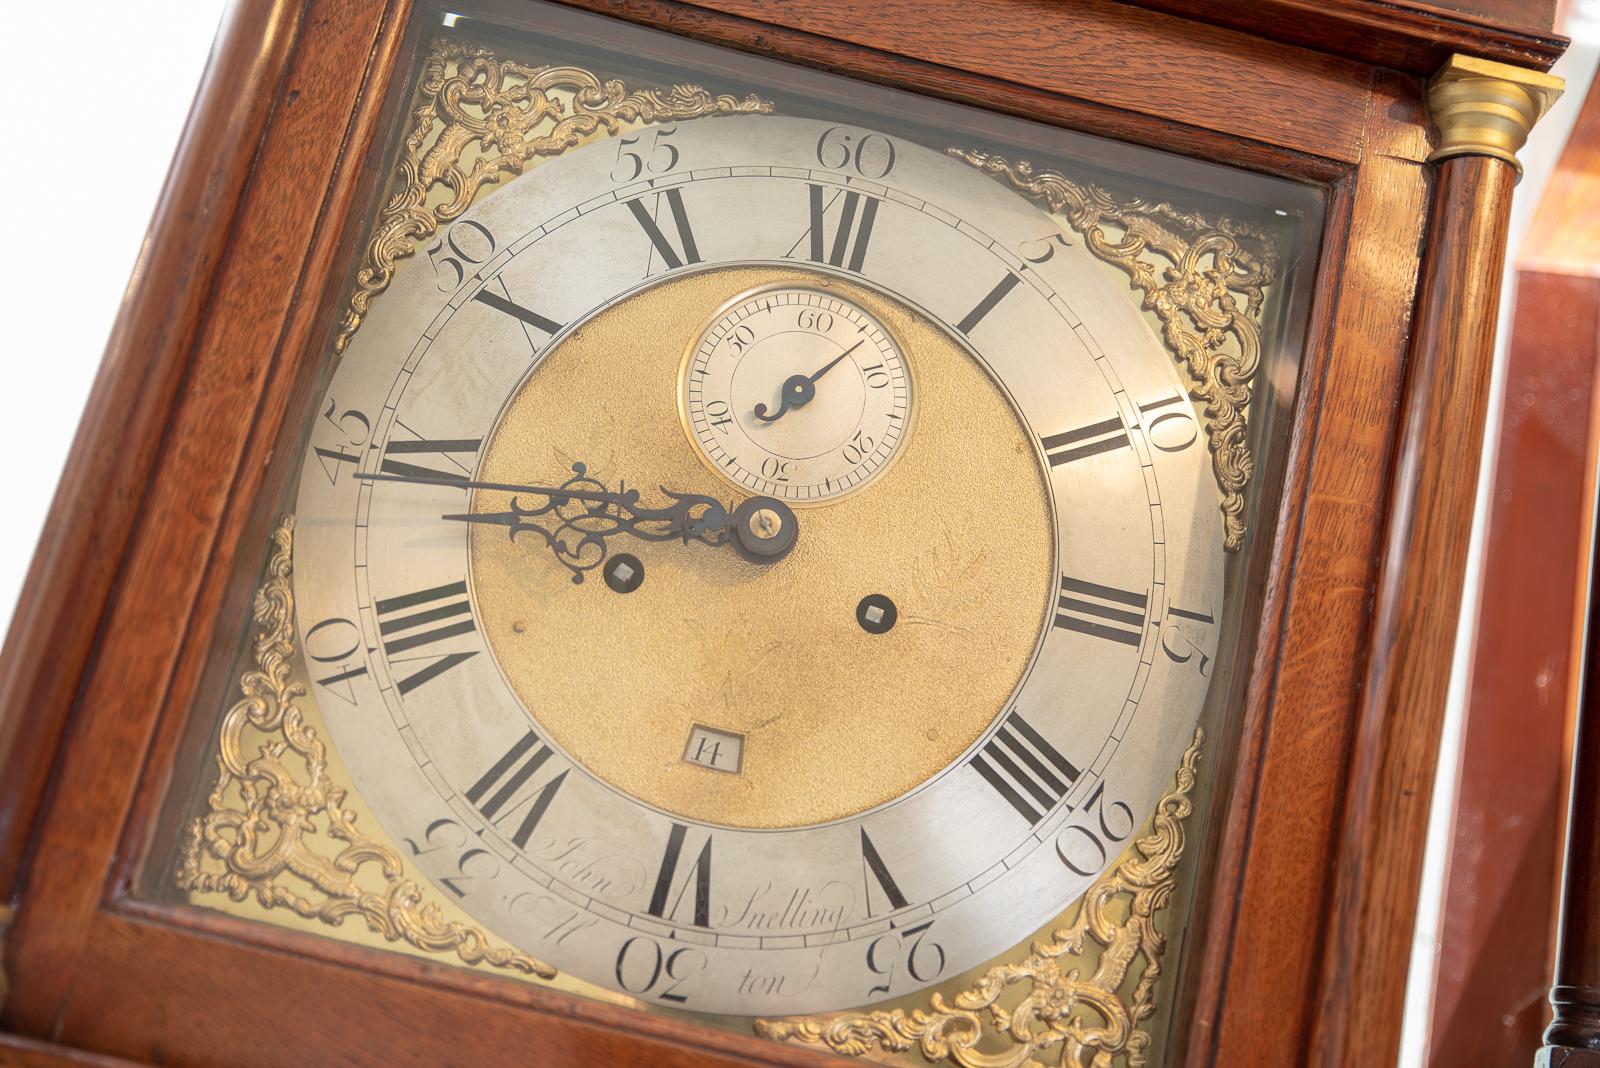 This lovely 8 day square brass dial strikes the hours on a single bell.
The maker is John Snelling of Alton in Hampshire and was recorded working from 1761 onwards.
This is very slim oak case with original caddy top and side viewing glass to the